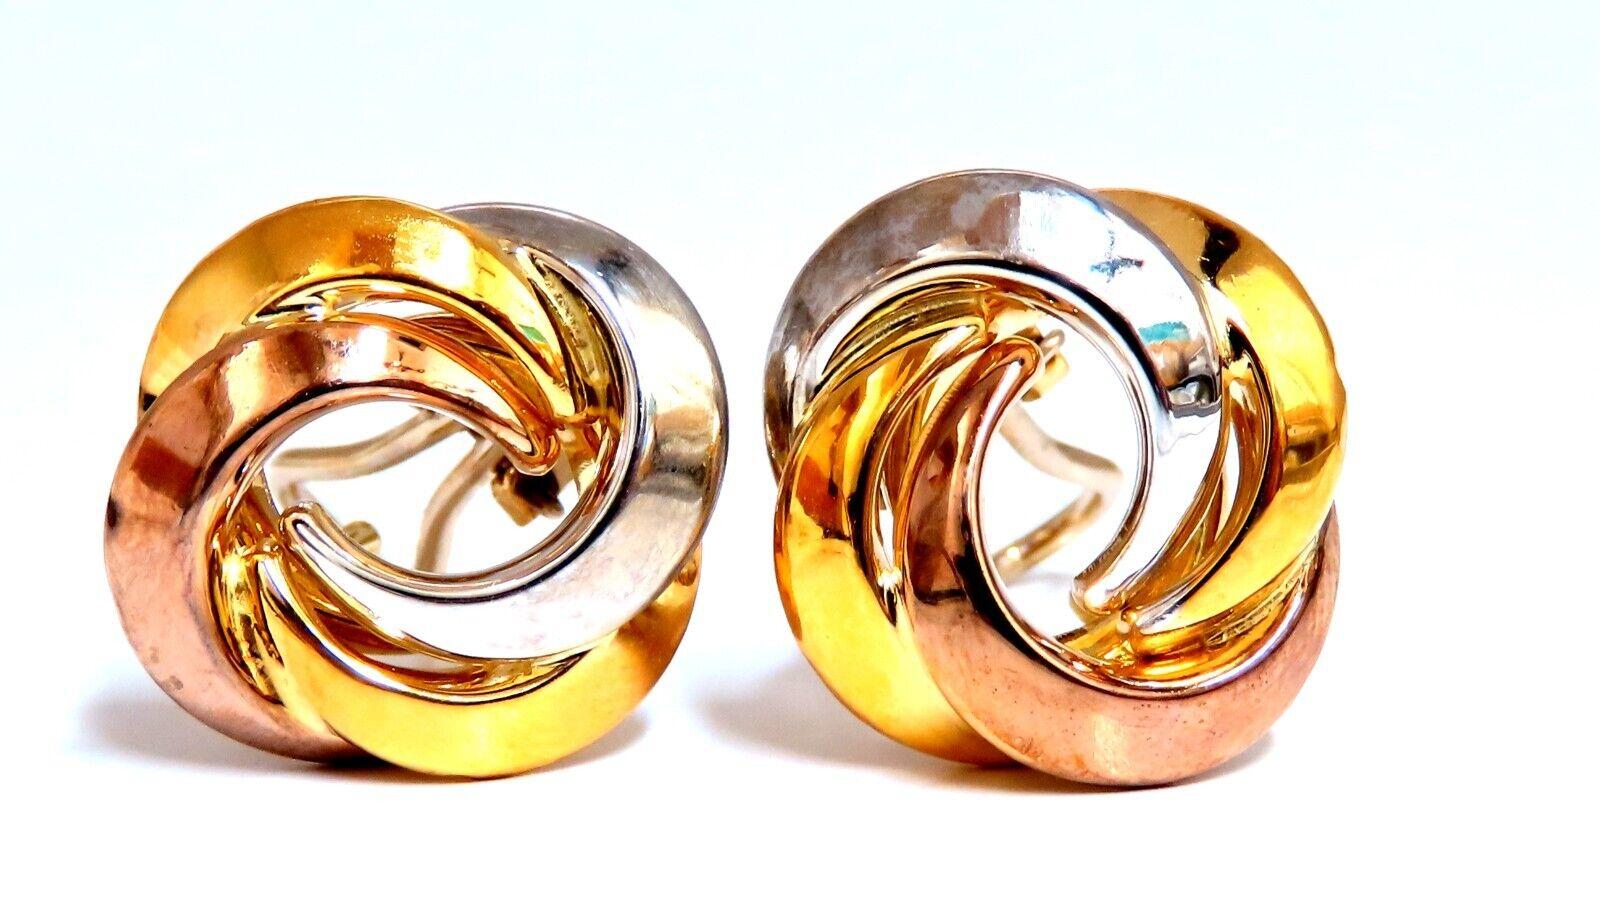 Circular Clip Earrings

Measurements of Earrings:

17mm diameter

Front to back: 15mm

5mm depth

9.3 grams / 18kt. yellow gold

Earrings are gorgeous made